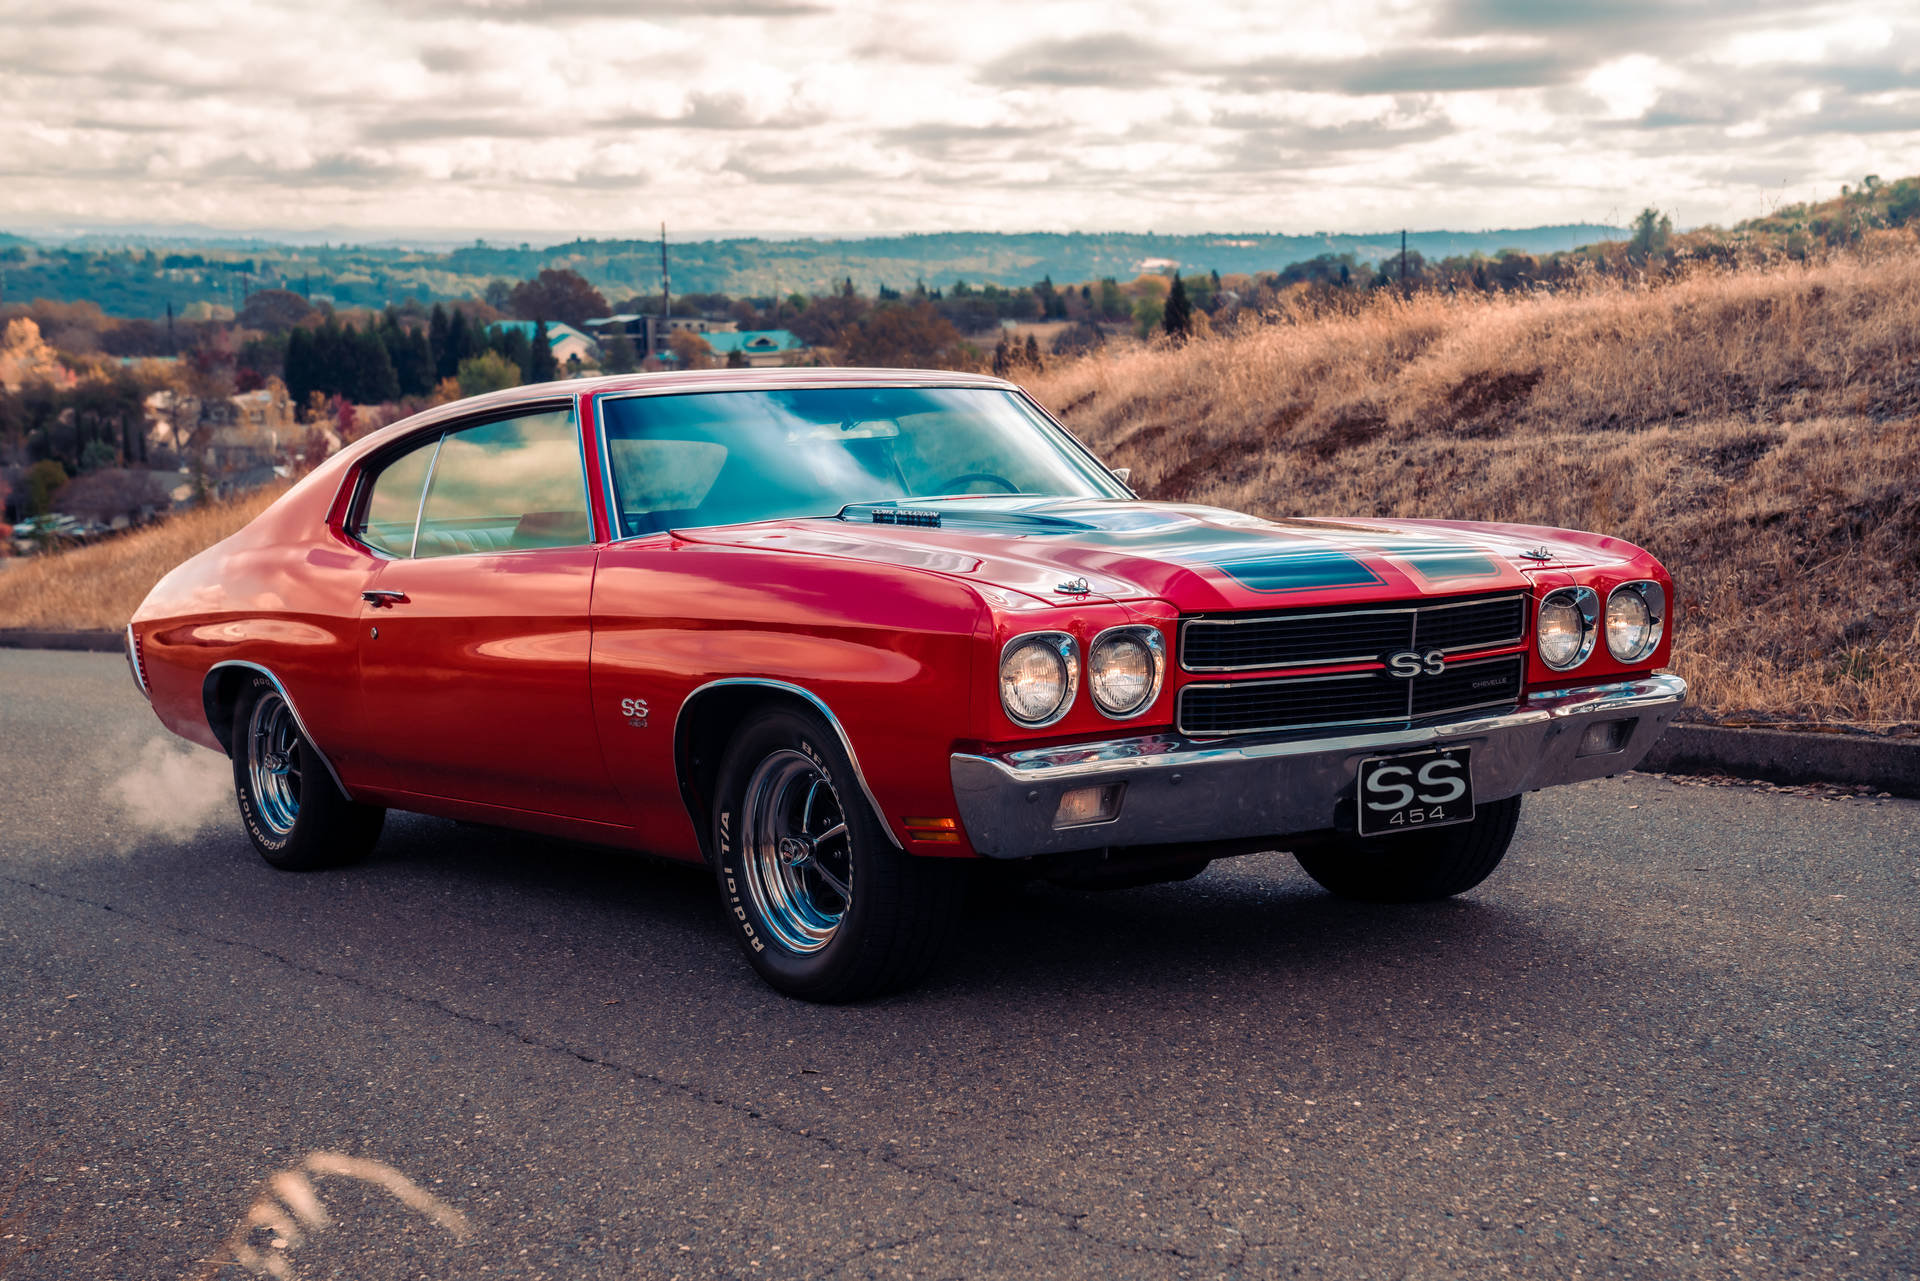 Classic Chevrolet Chevelle in Action Wallpaper